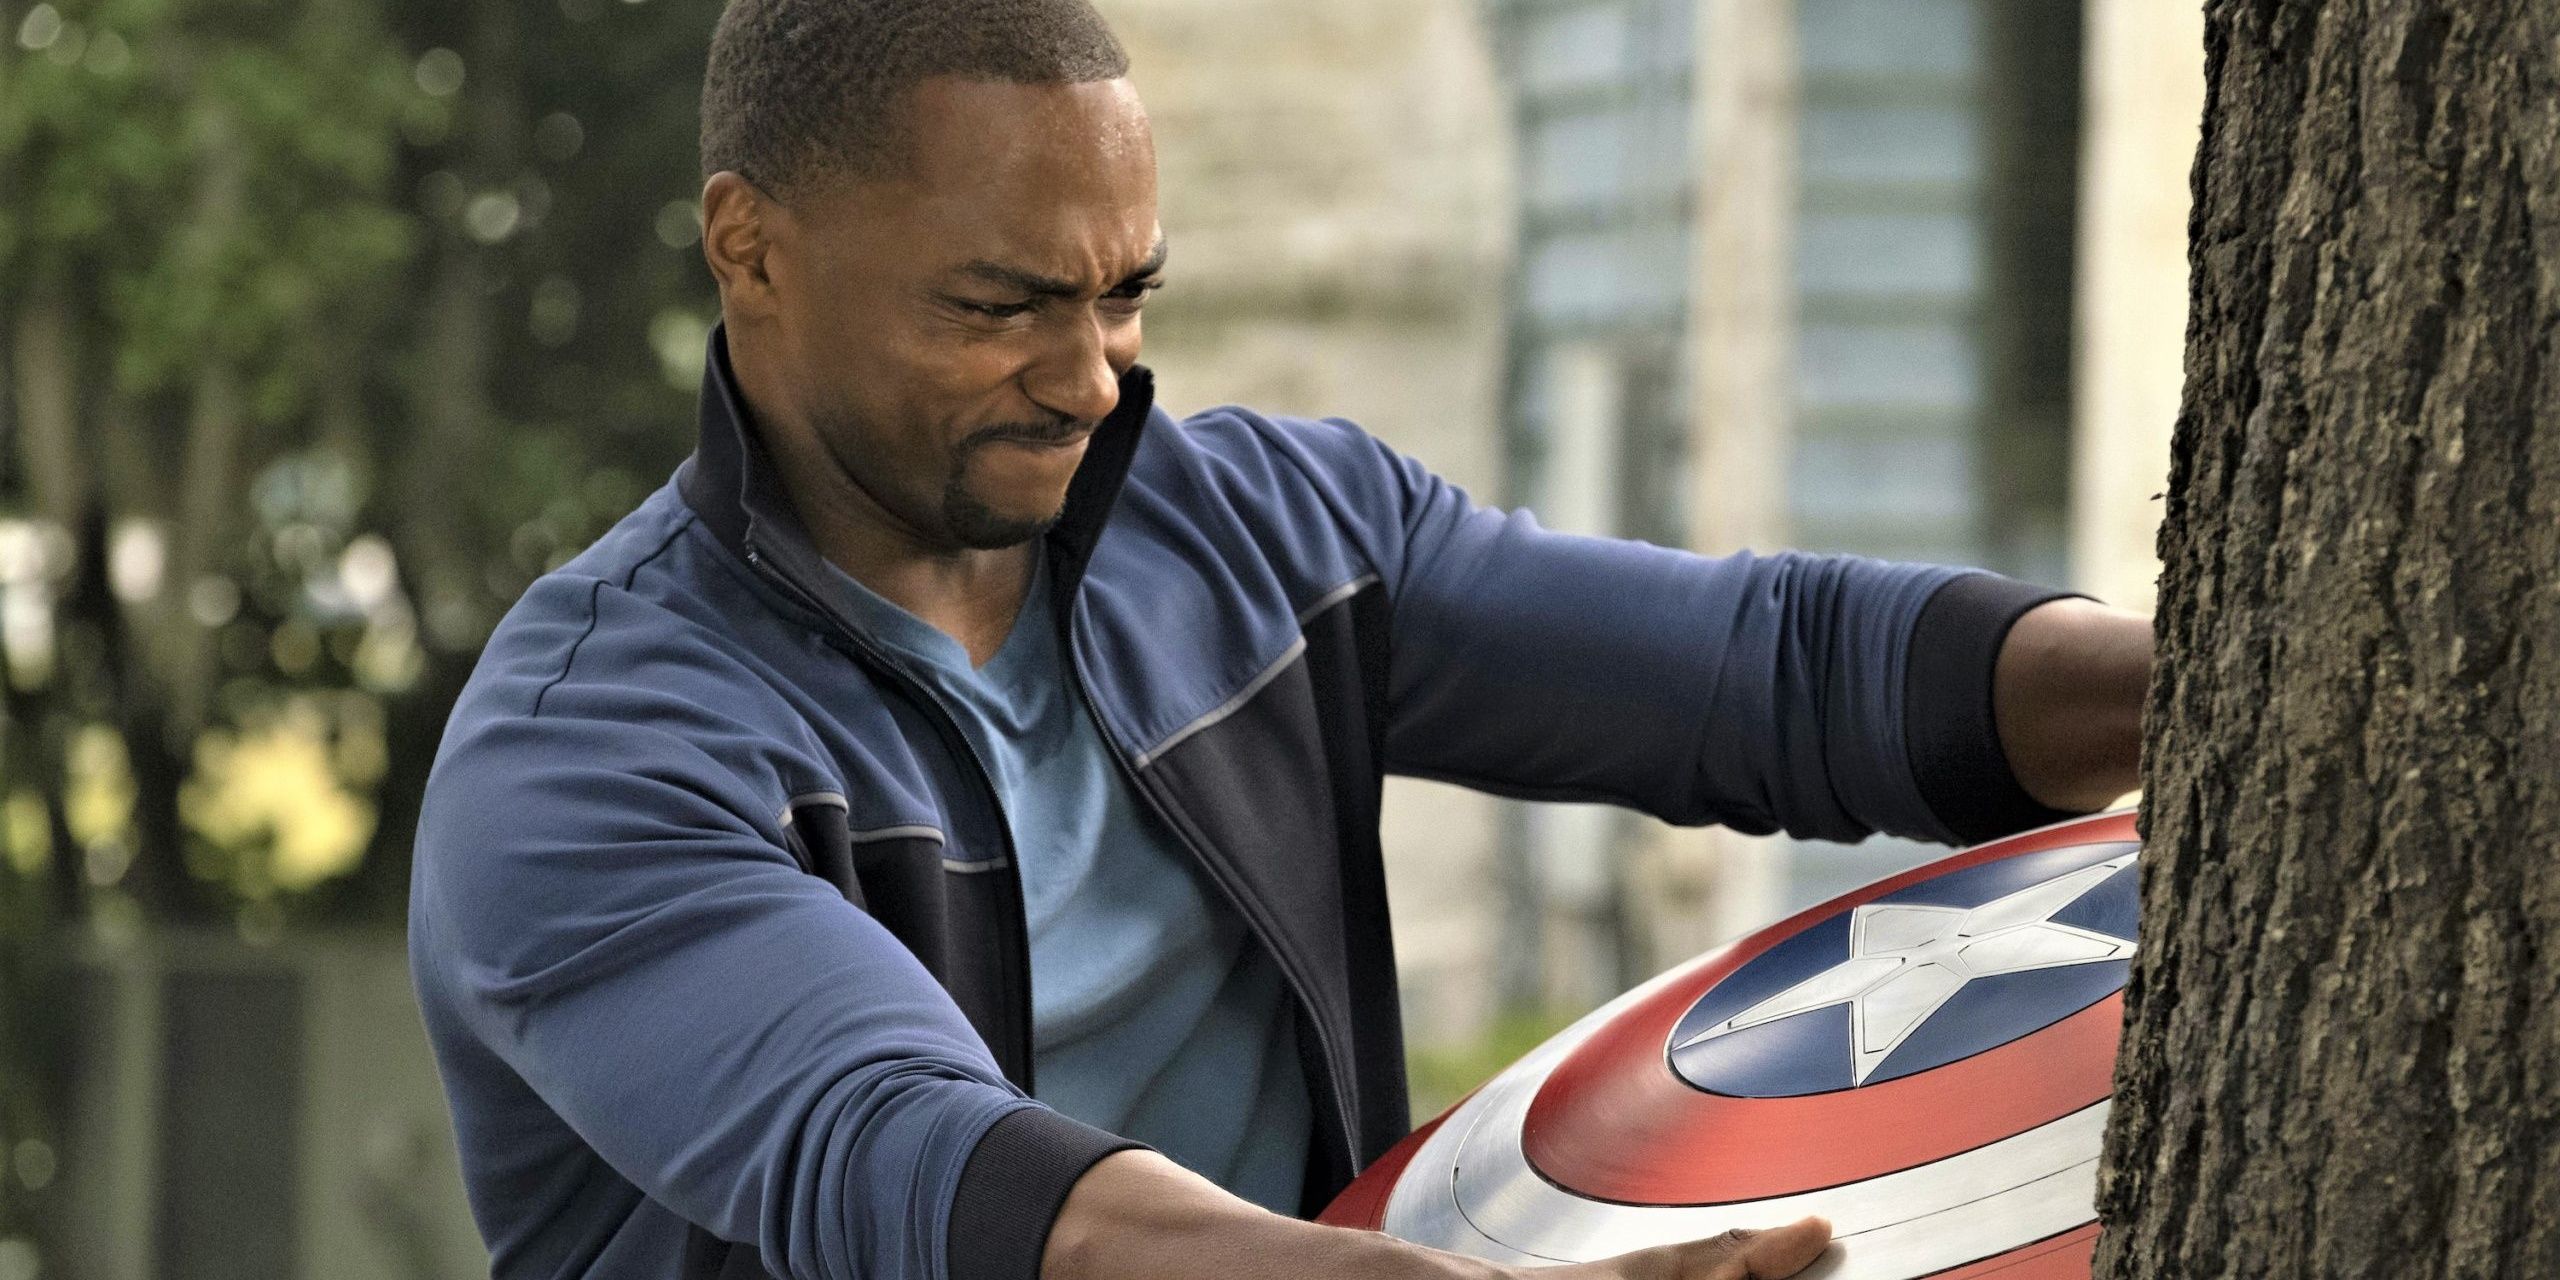 Sam Wilson practicing with the shield in the Falcon and the Winter Soldier